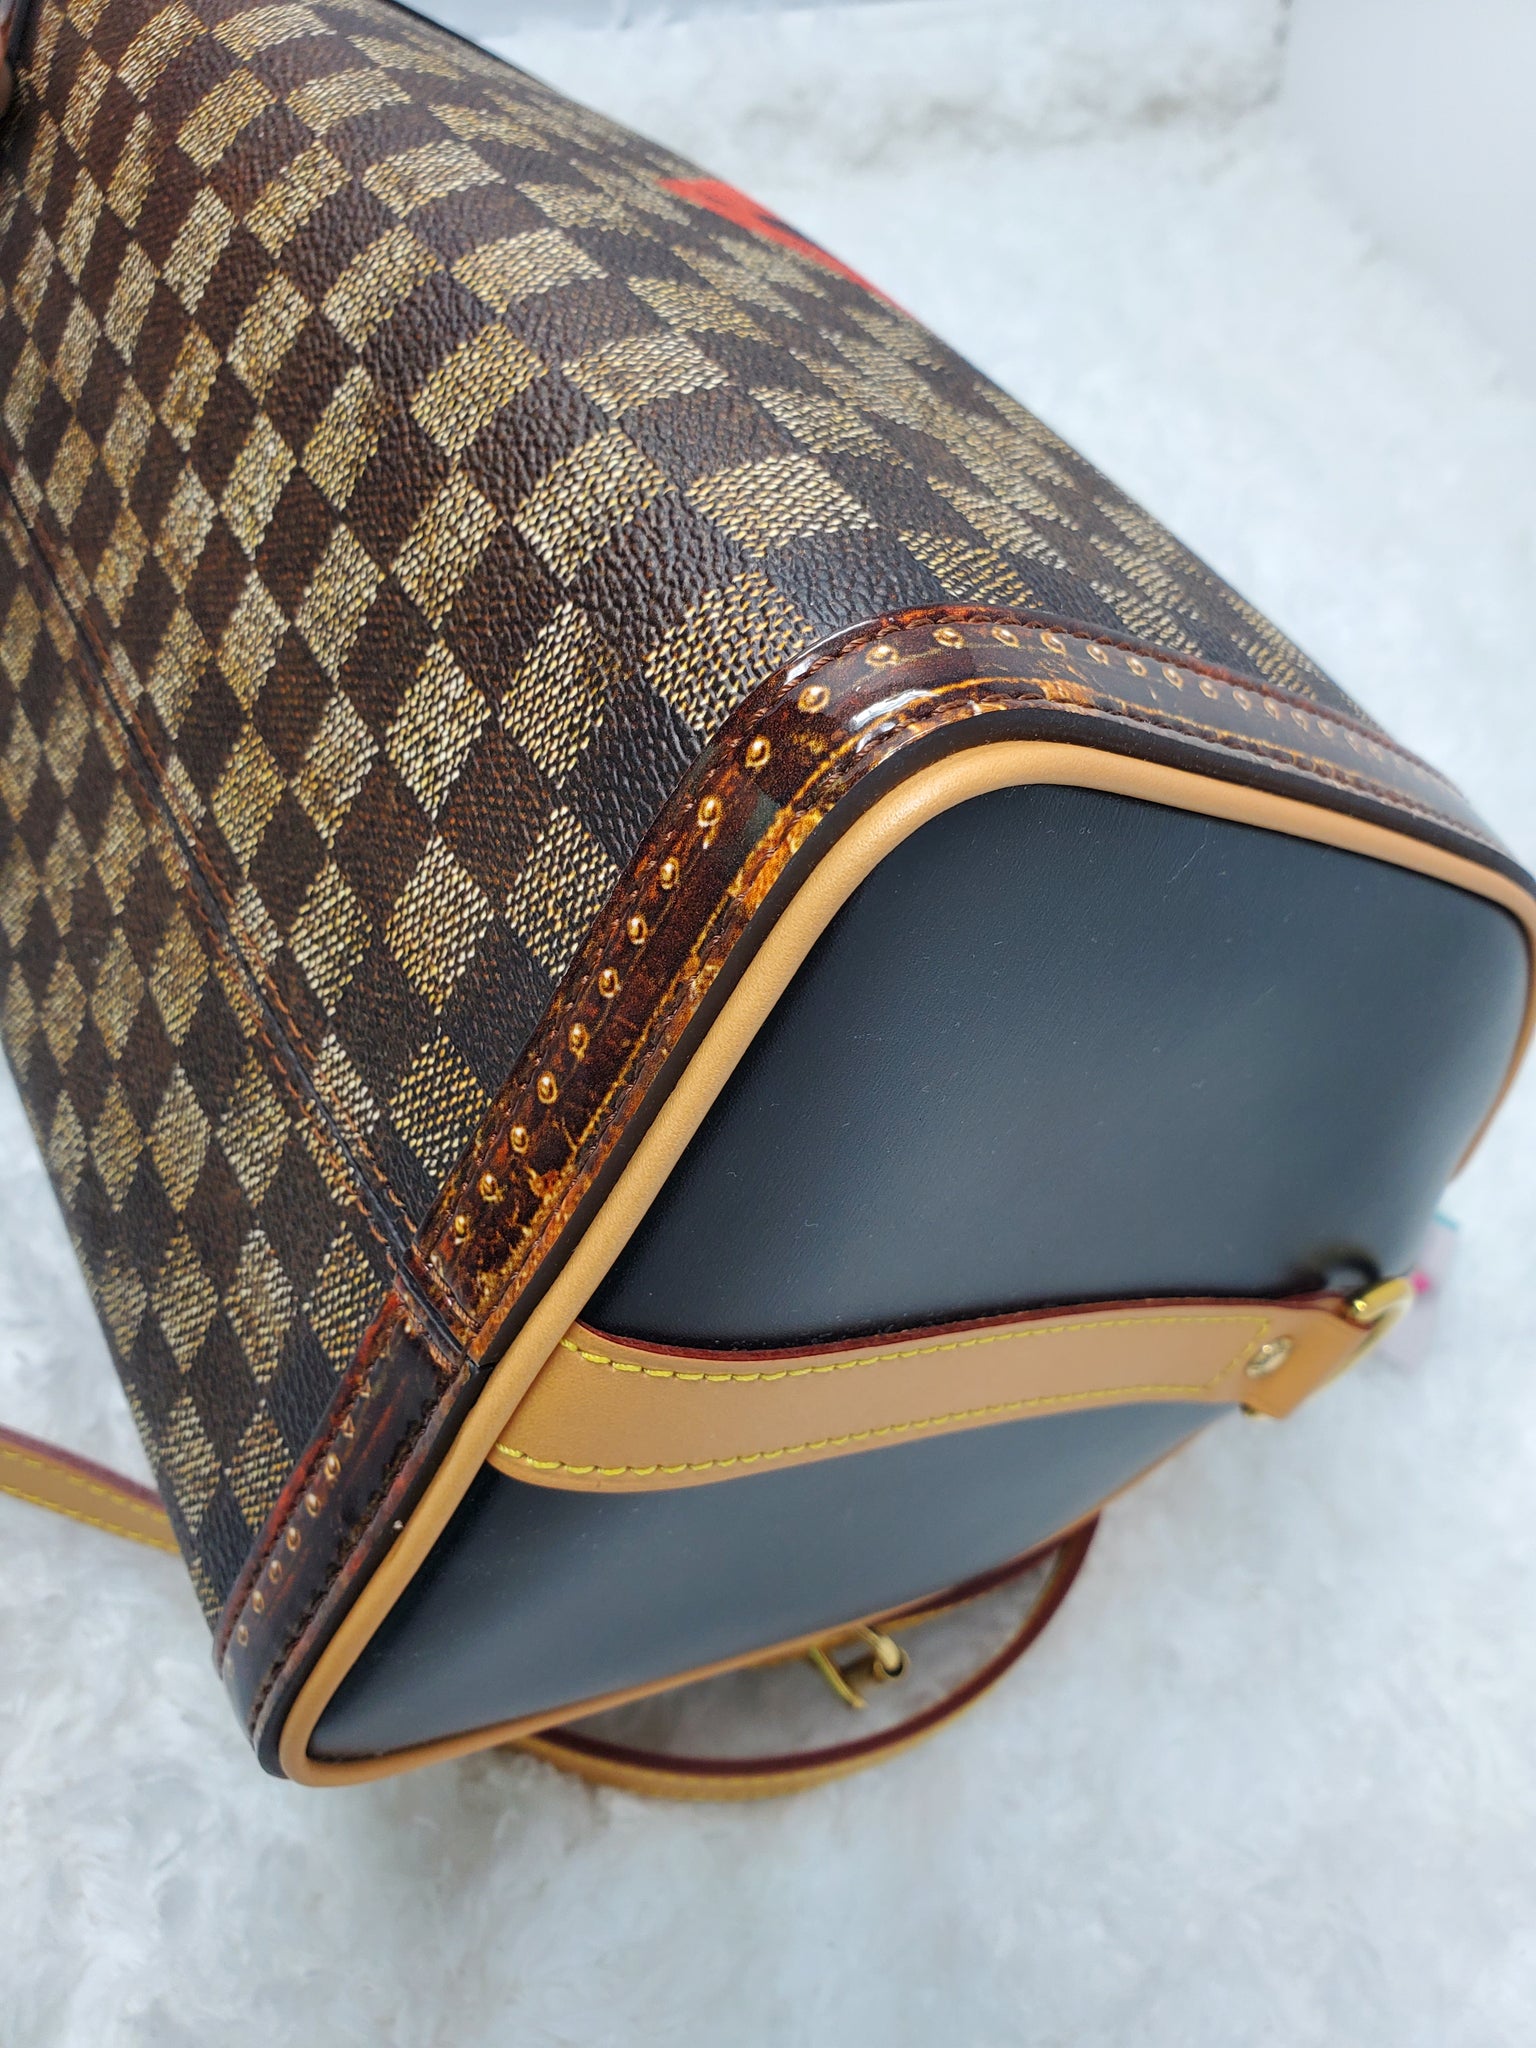 Louis Vuitton - Speedy 25 – The Reluxed Collection